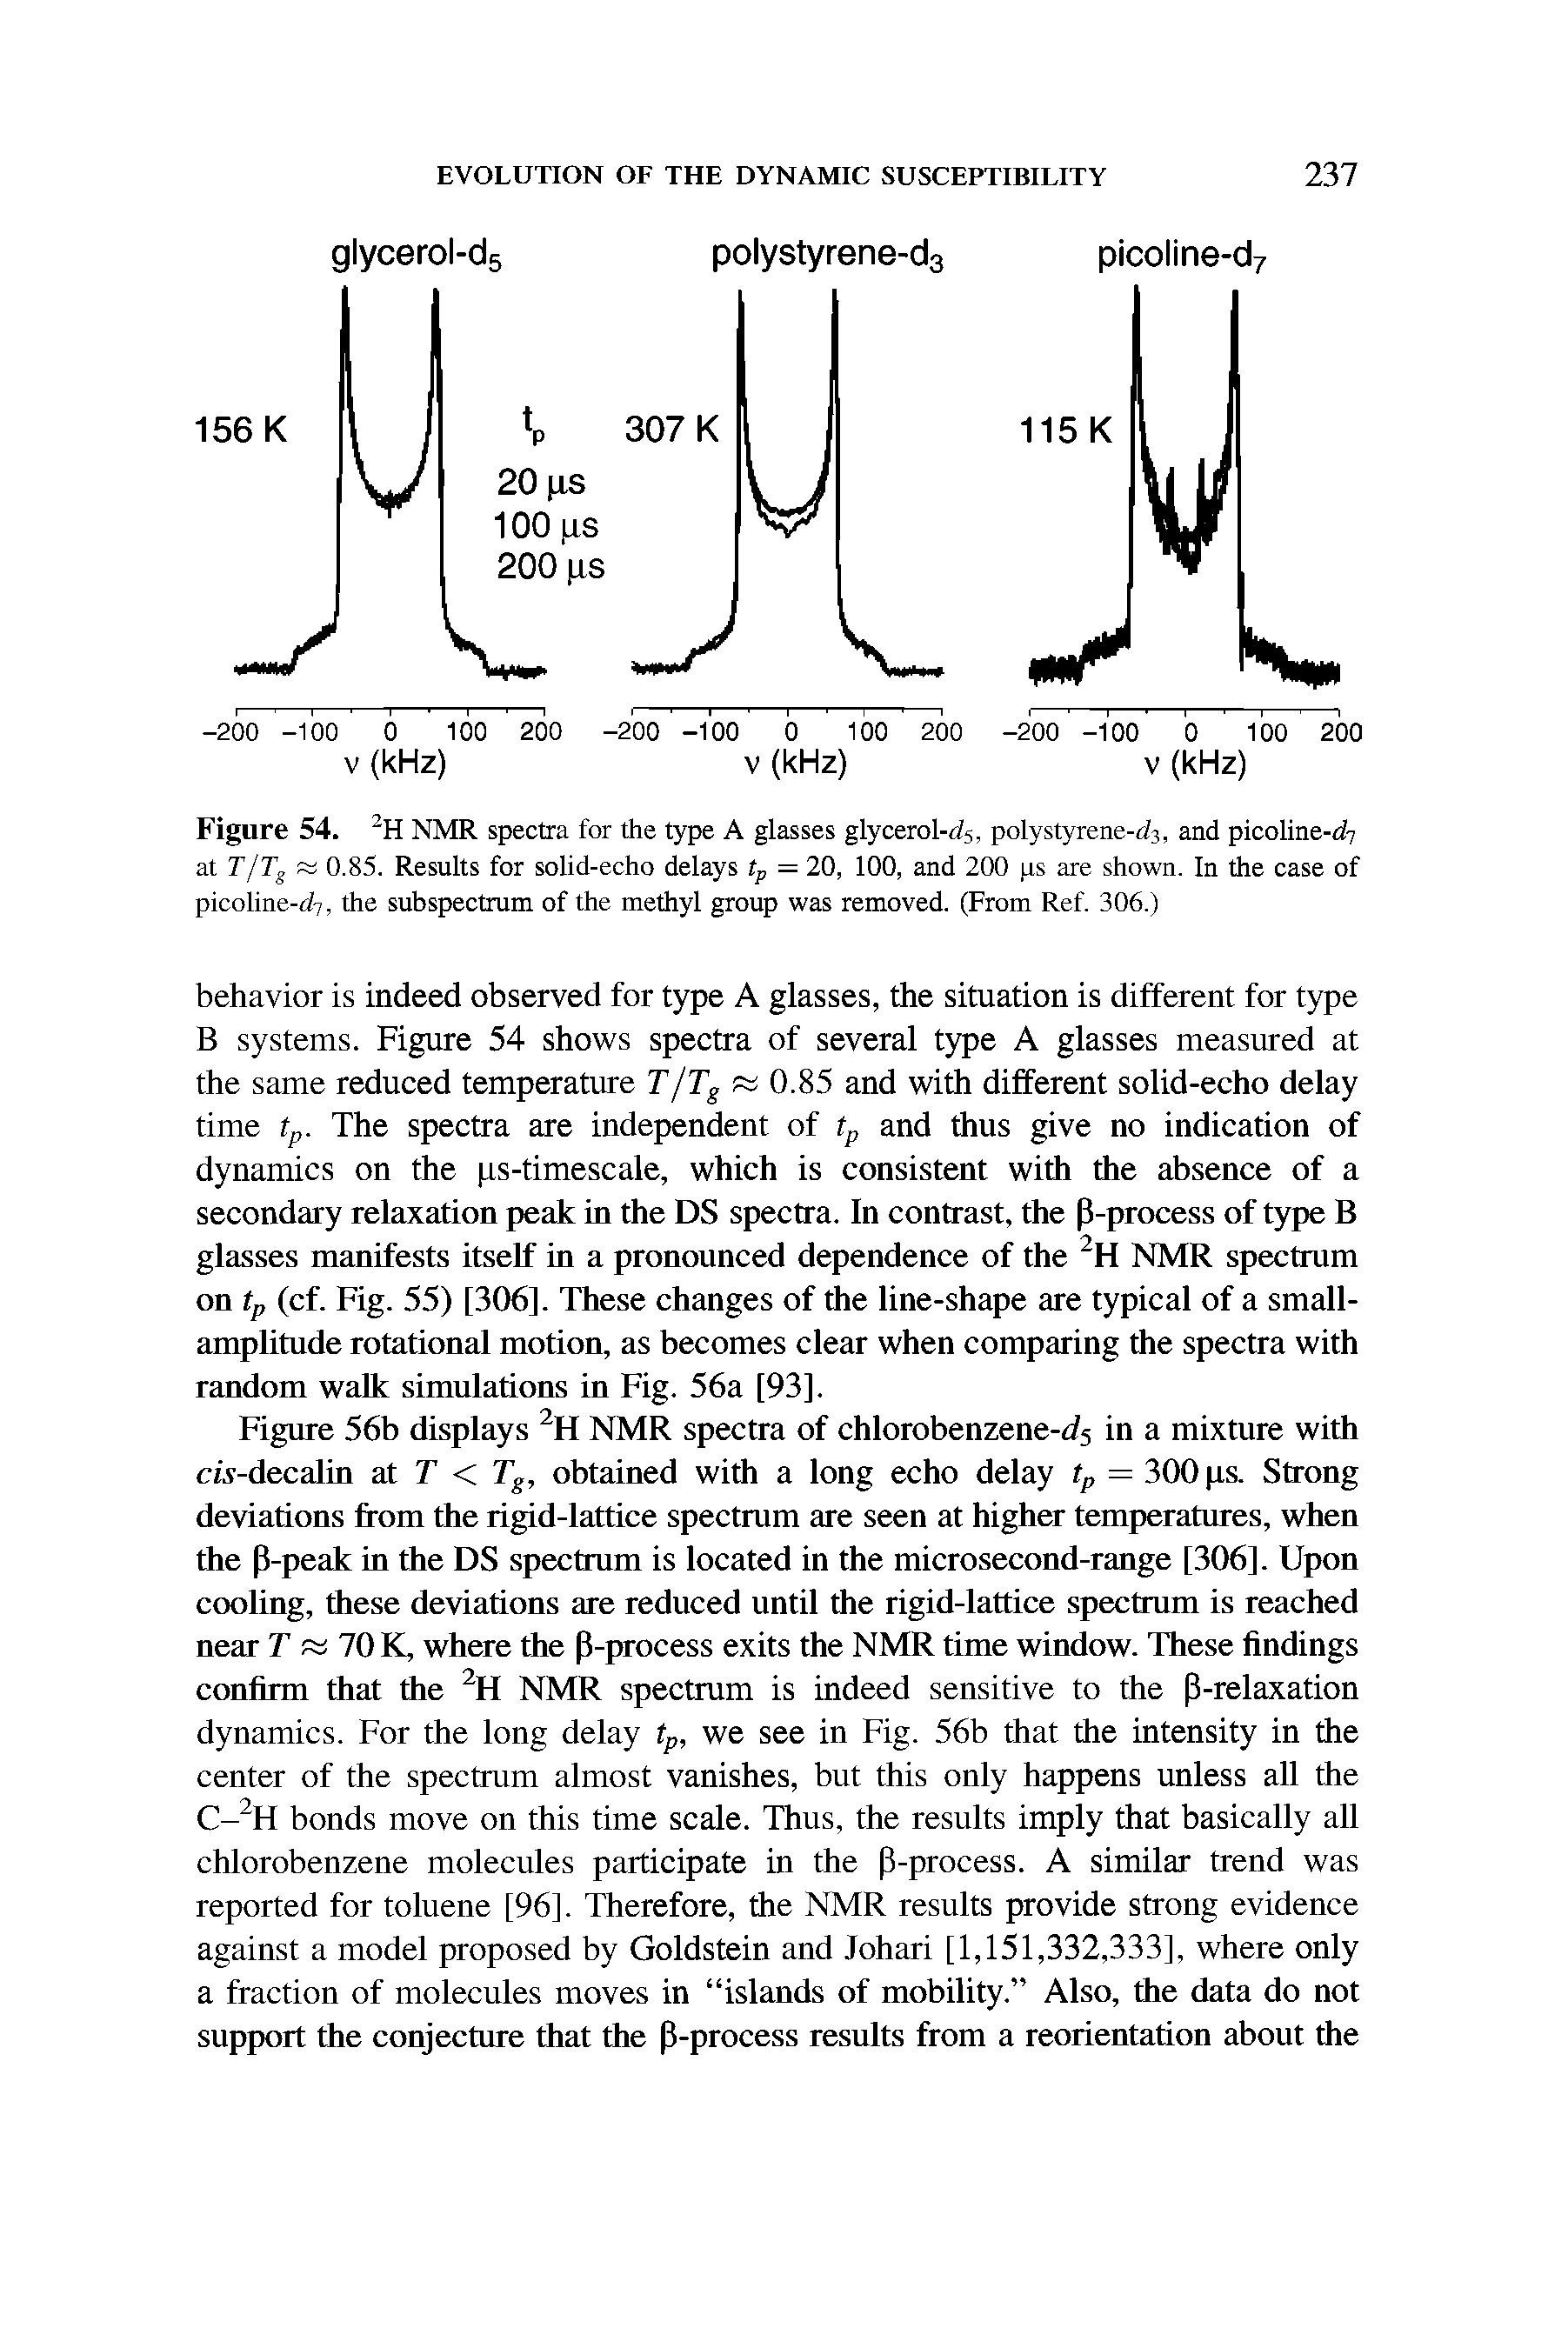 Figure 54. 2H NMR spectra for the type A glasses glycerol-, polystyrene-, and picoline-rfy at T/Ts ss 0.85. Results for solid-echo delays tp = 20, 100, and 200 ps are shown. In the case of picoline-(i7, the subspectrum of the methyl group was removed. (From Ref. 306.)...